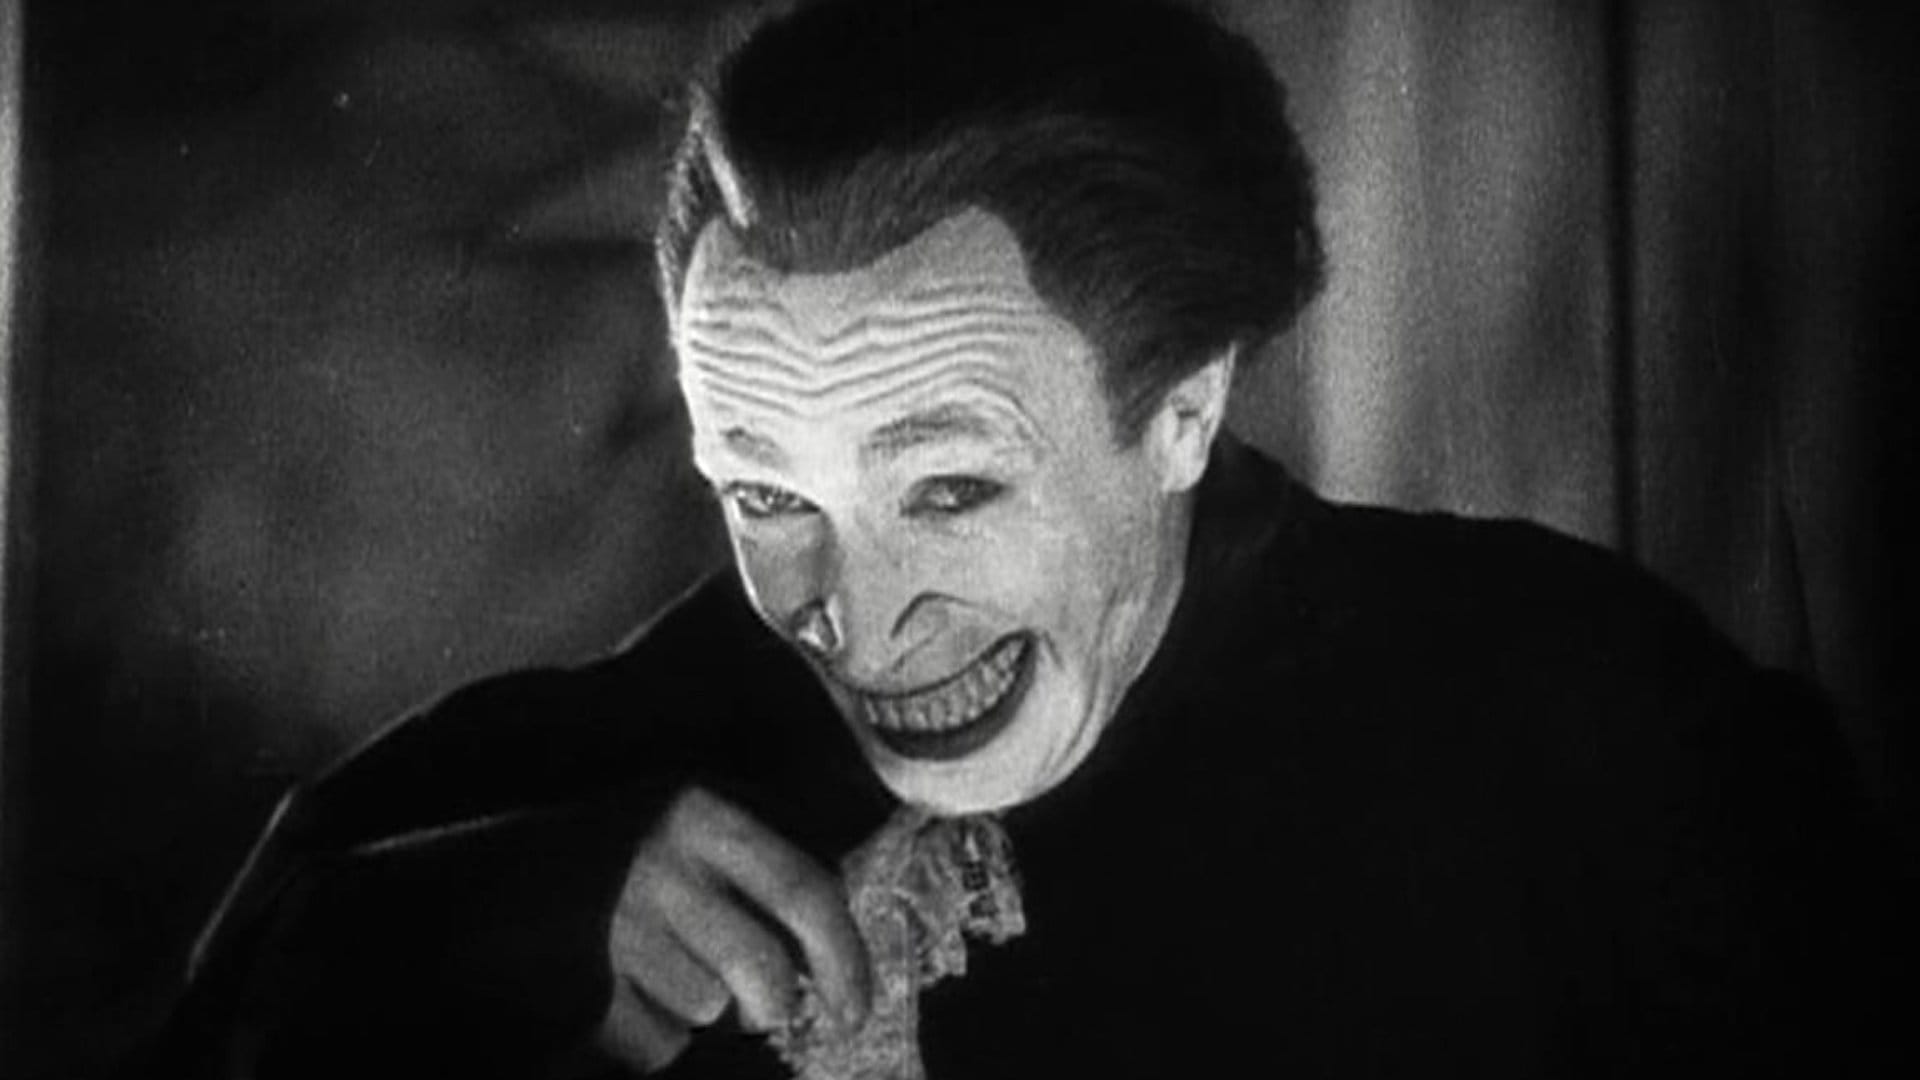 'The Man Who Laughs' (1928) has just entered public domain